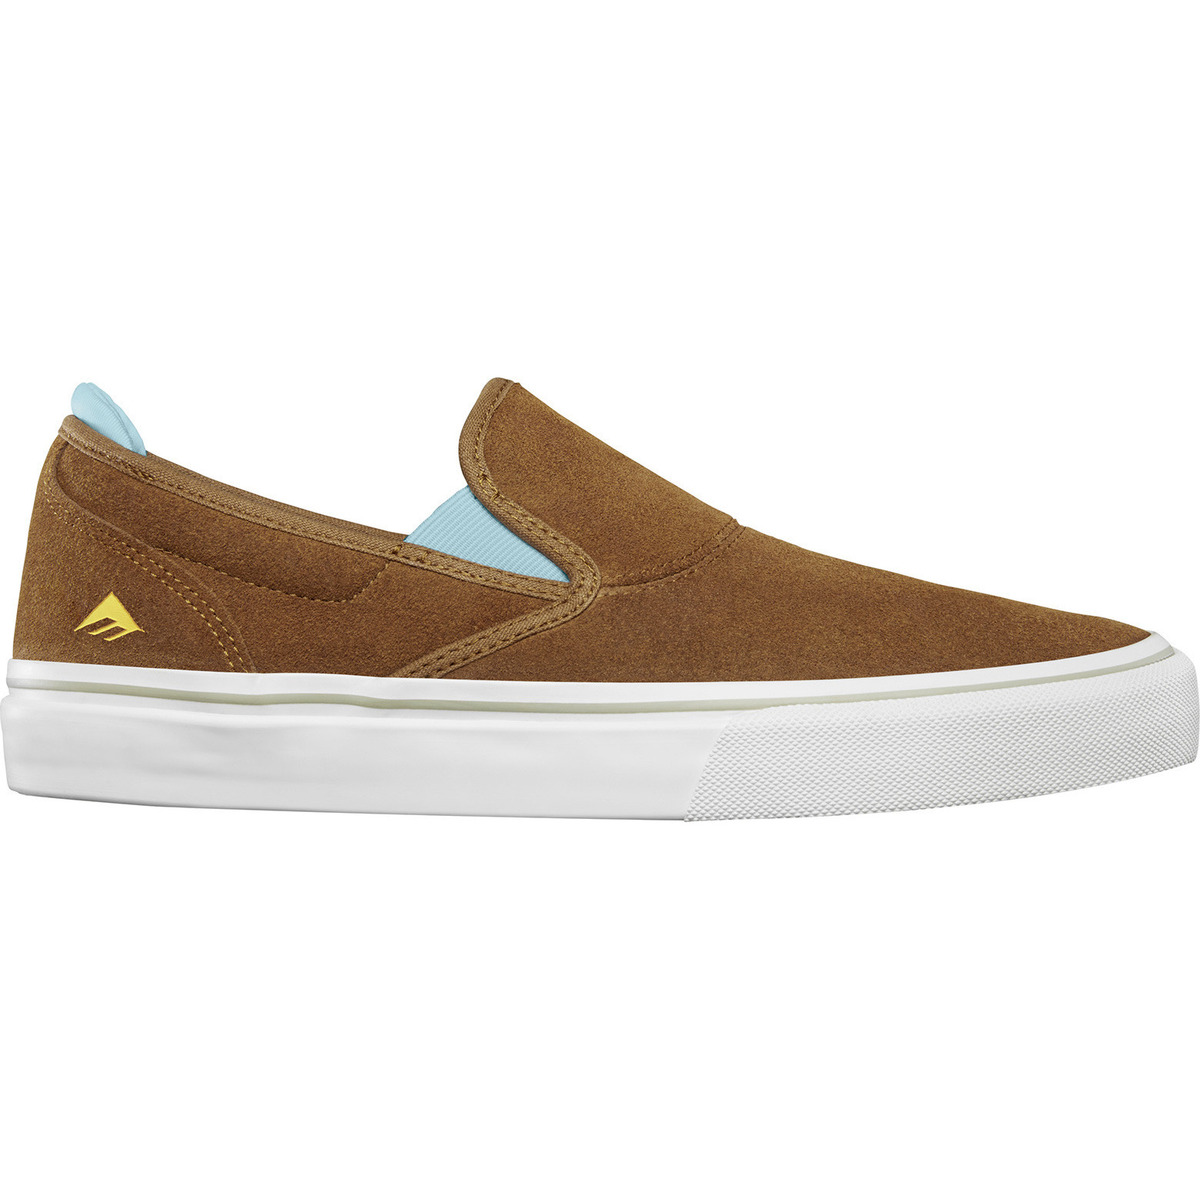 Chaussures Loints Of Holla Emerica WINO G6 SLIP ON BROWN BLUE 